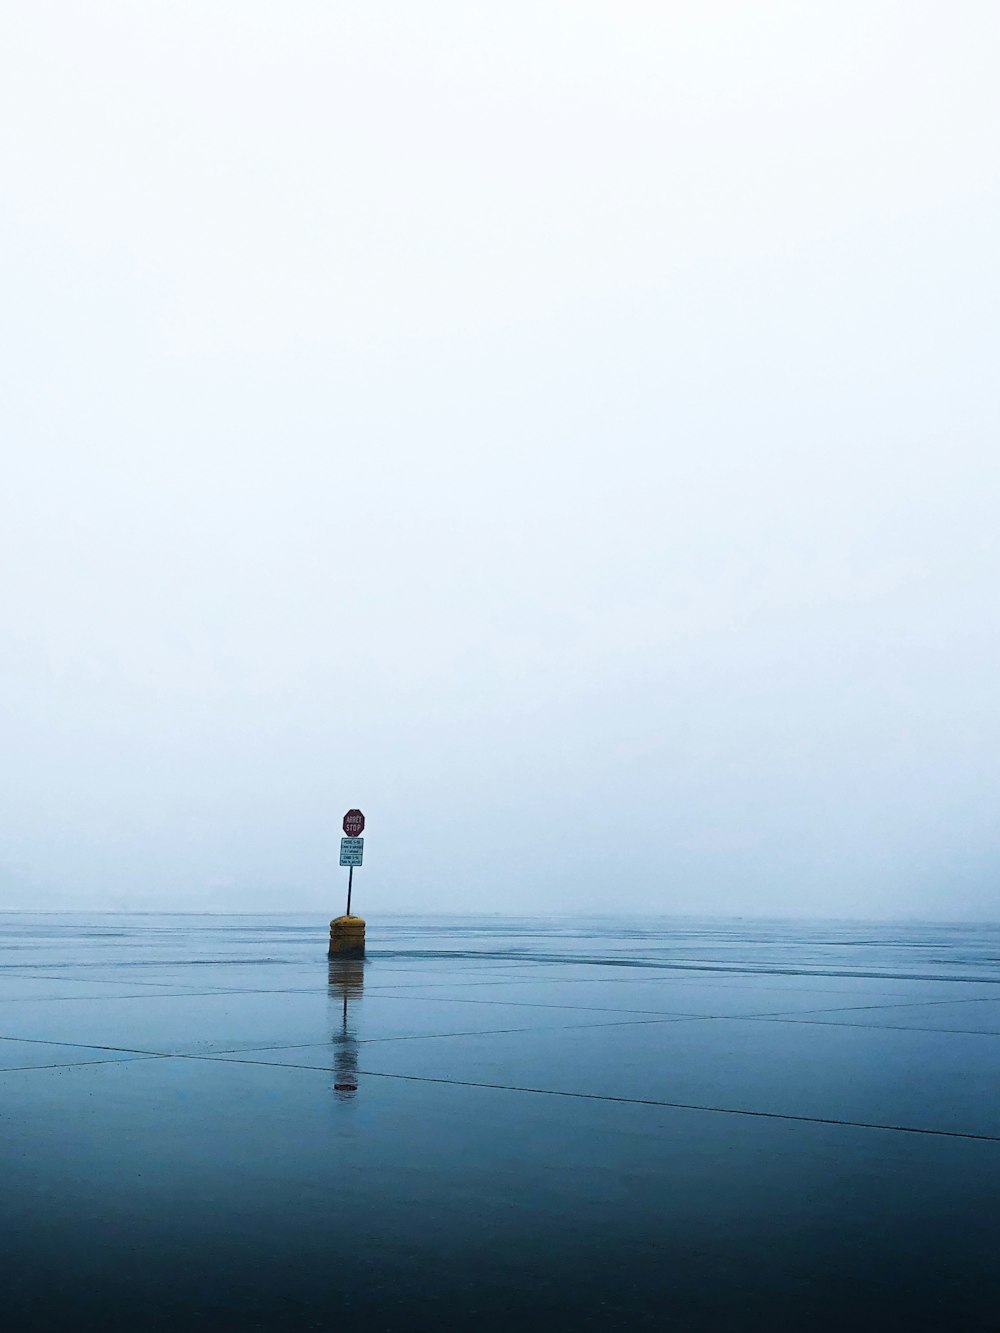 a person standing on a pole in the middle of a large body of water